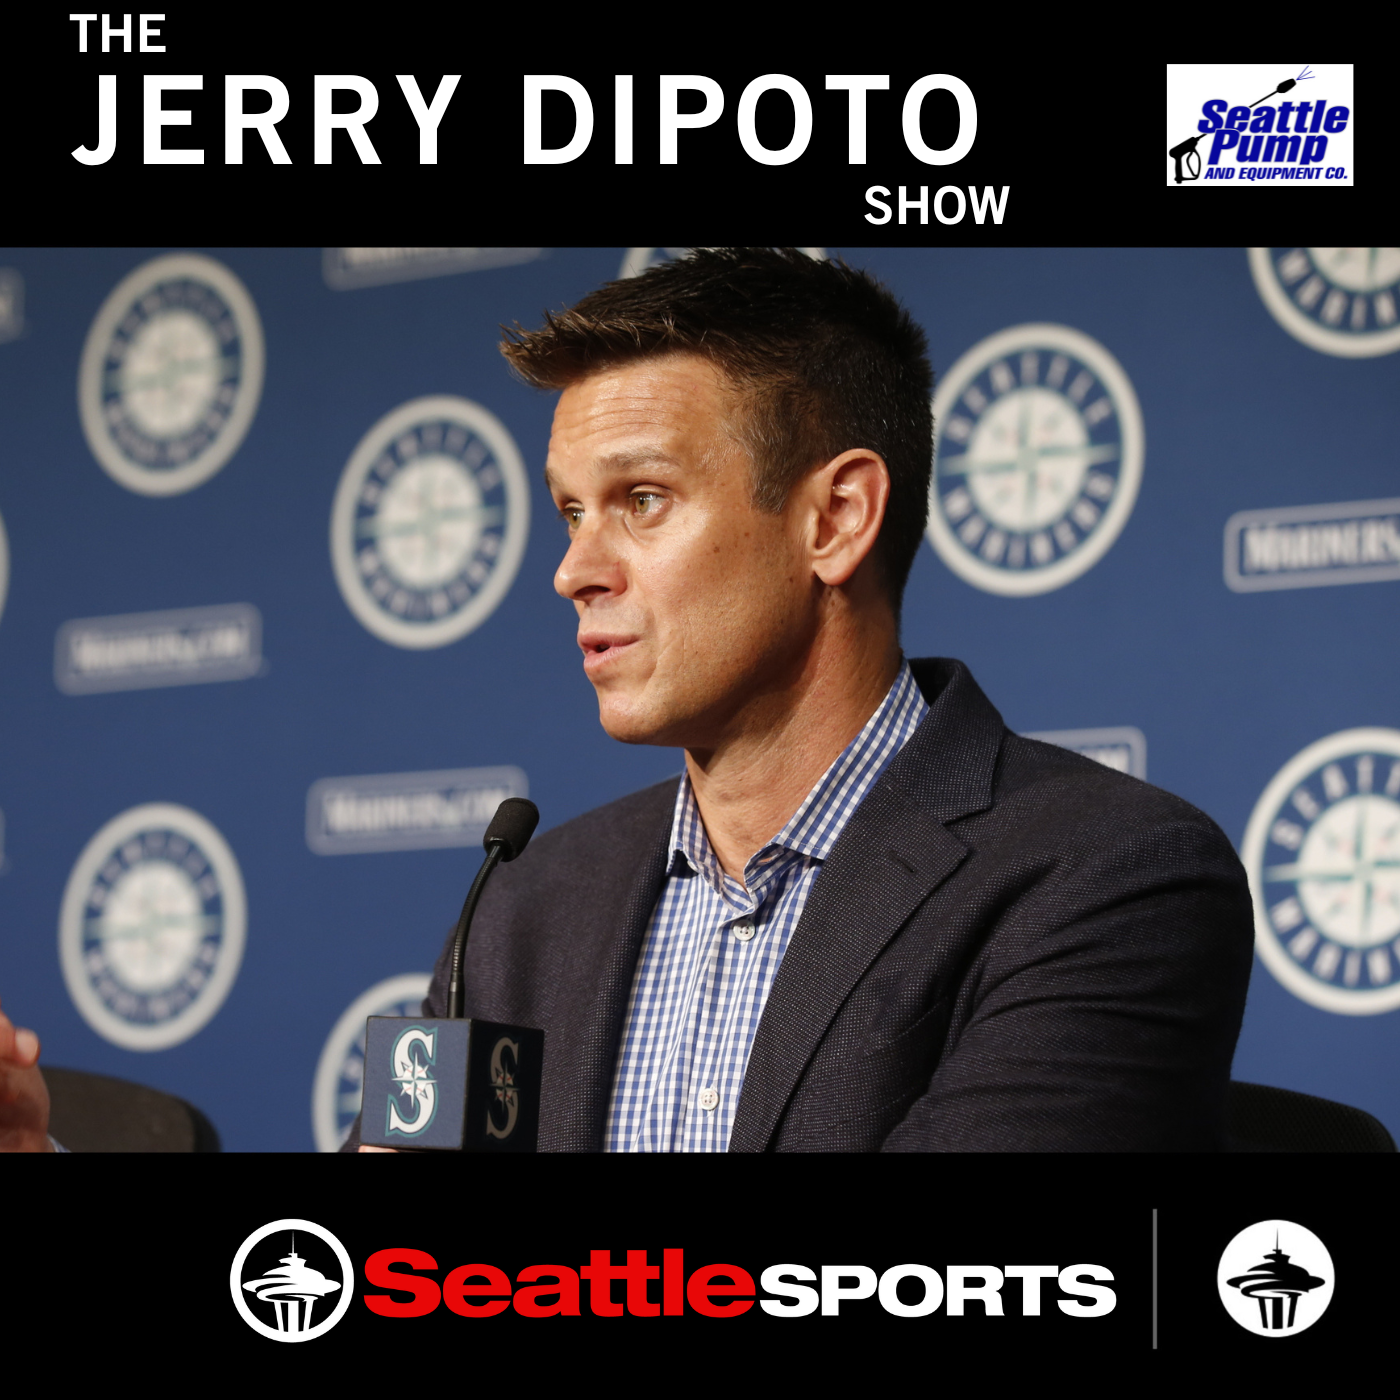 Jerry Dipoto-Discusses the Red Sox series and Jarred Kelenic's development